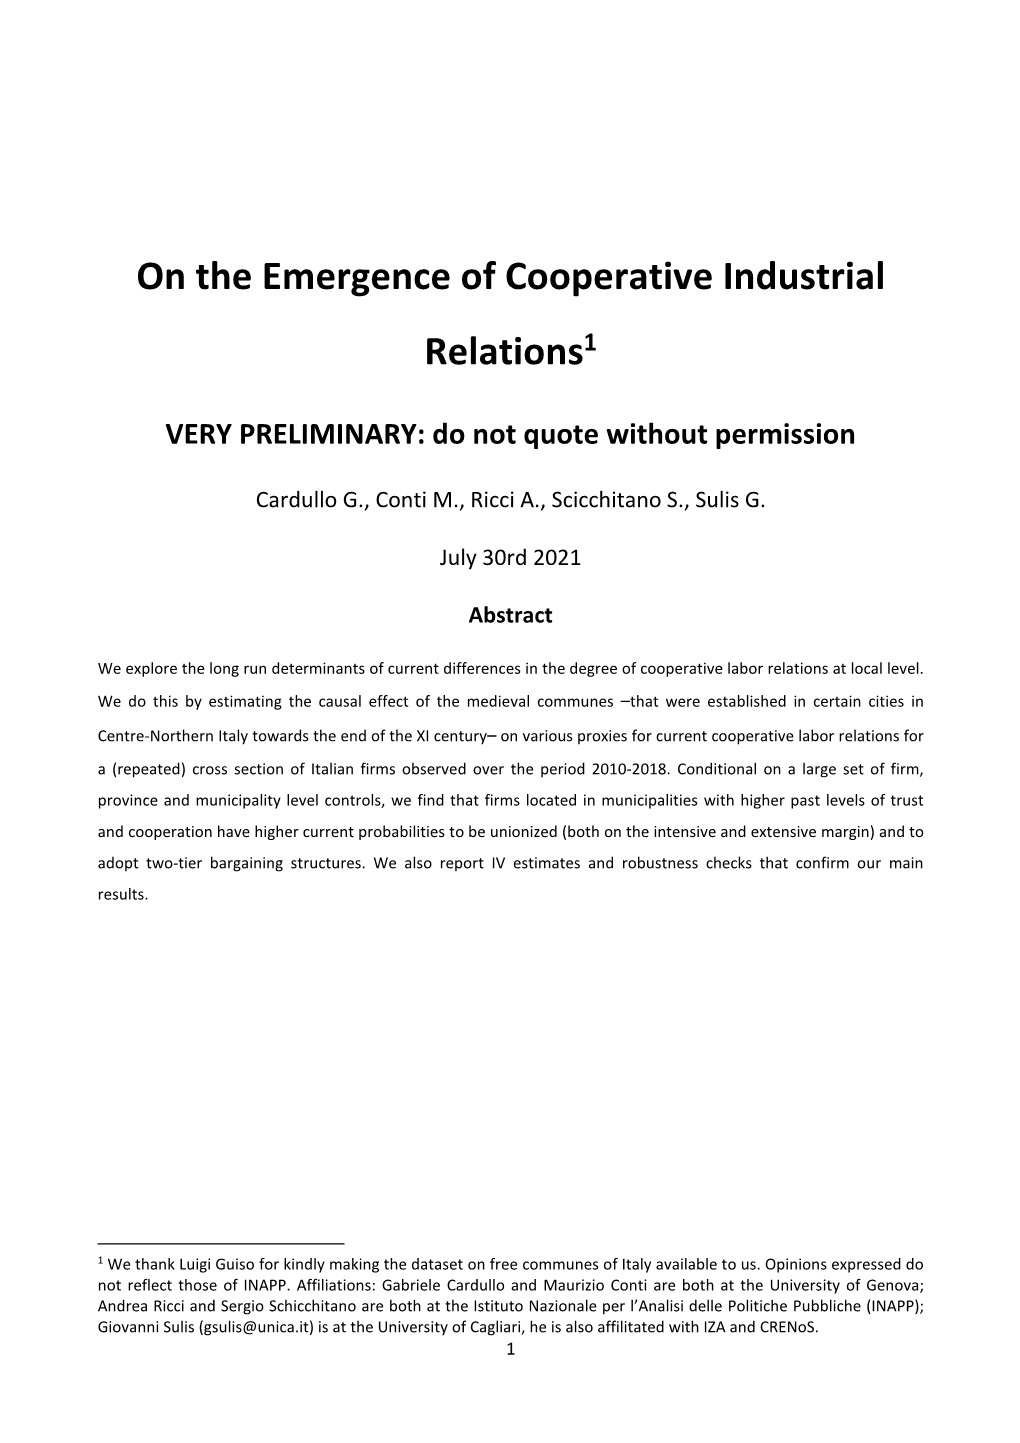 On the Emergence of Cooperative Industrial Relations1